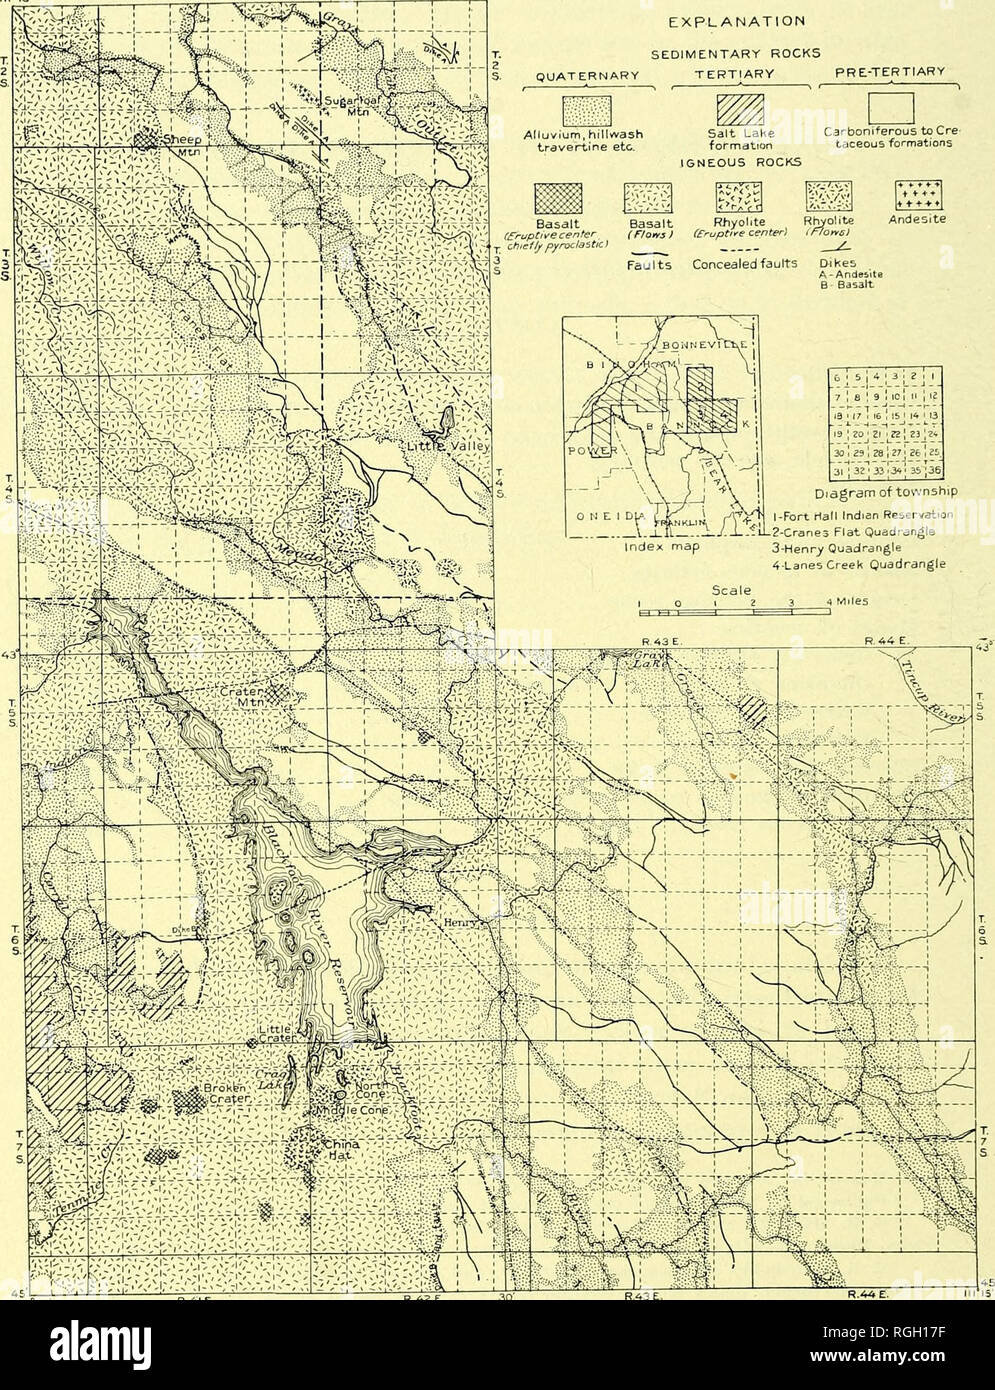 . Bulletin of the Geological Society of America. Geology. 250 G. R. MANSFIELD IGNEOUS GEOLOGY OF IDAHO R.42 E. 30 EXPLANATION SEDIMENTARY ROCKS TERTIARY PRE-TERTIARY Alluvium hillwash Salt Lahe Carboniferous to Cre travertine etc. formatron taceous formations IGNEOUS ROCKS Basalt Basalt Rhyolite Rhyolite Andesite (SrapCivecenter (Flans) (Eruptive center) iF/owl y chtef/jfpyroclastiO / J Faults Concealed faults Dikes = A-Andesita 6 Basalt ^; 5 4 1 3 ; 8 1 1 7 1 8 9 1 ICi II i 12 19 1 (7 16 : 15 1 i» I 13 19 ; ZO^ 21 | 22| Z1Z-. lozs 28 1 27'; 86 1 2i. 31 ;32 33'iJ&lt;.; 35;36 Diagram of towns Stock Photo